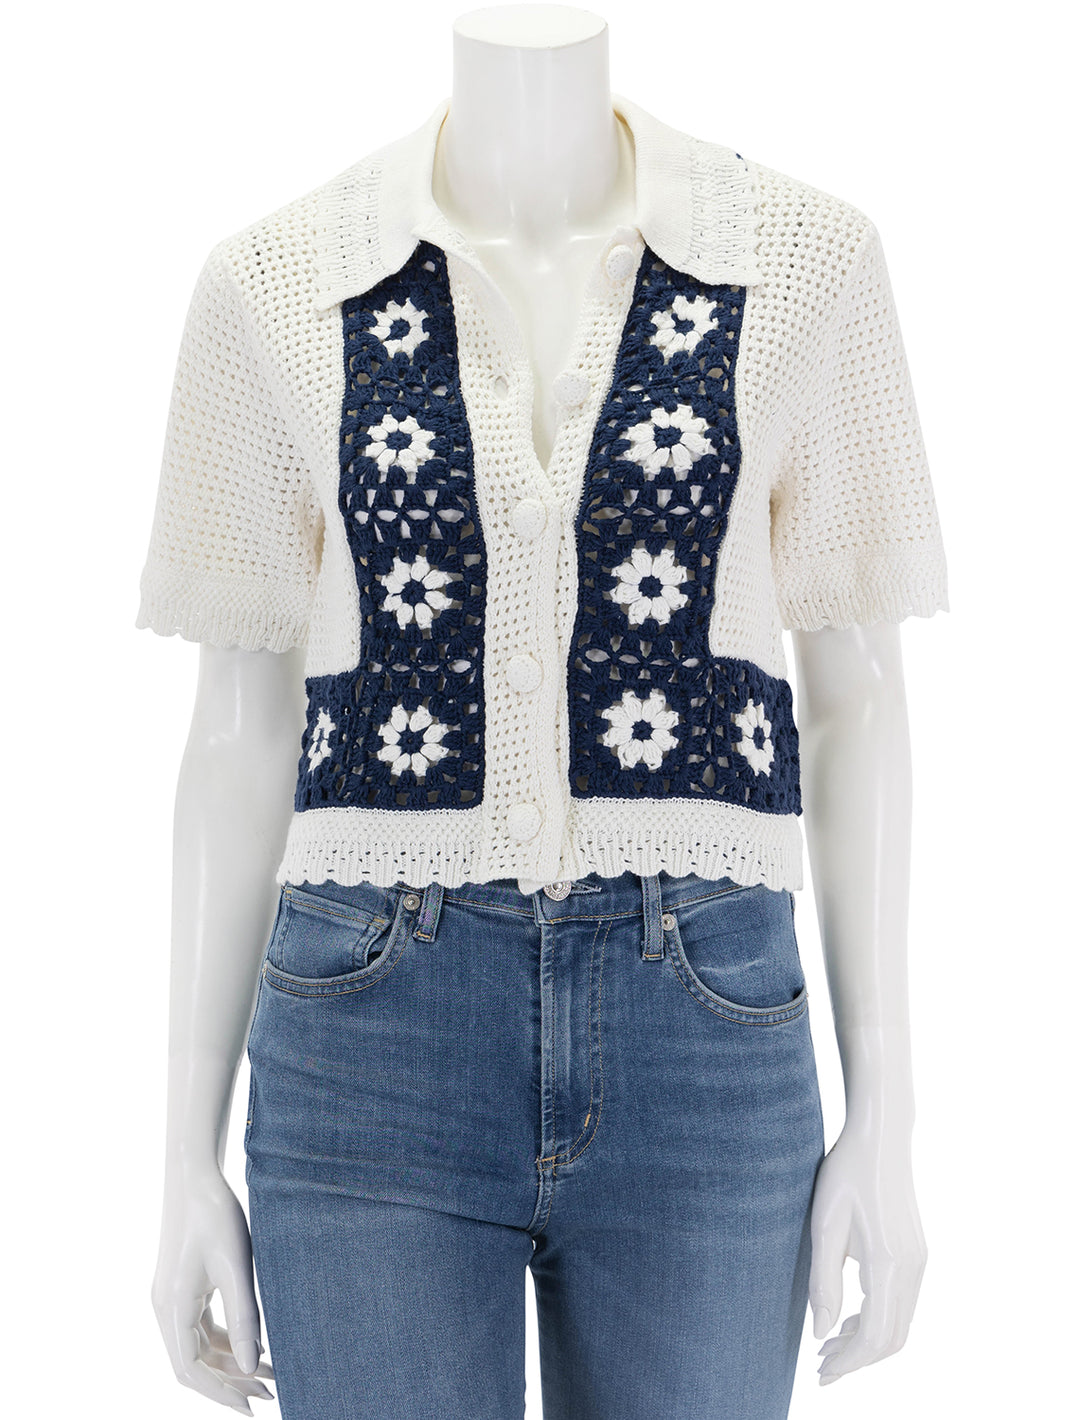 Front view of Rails' milan crochet daisy top in navy and cream.